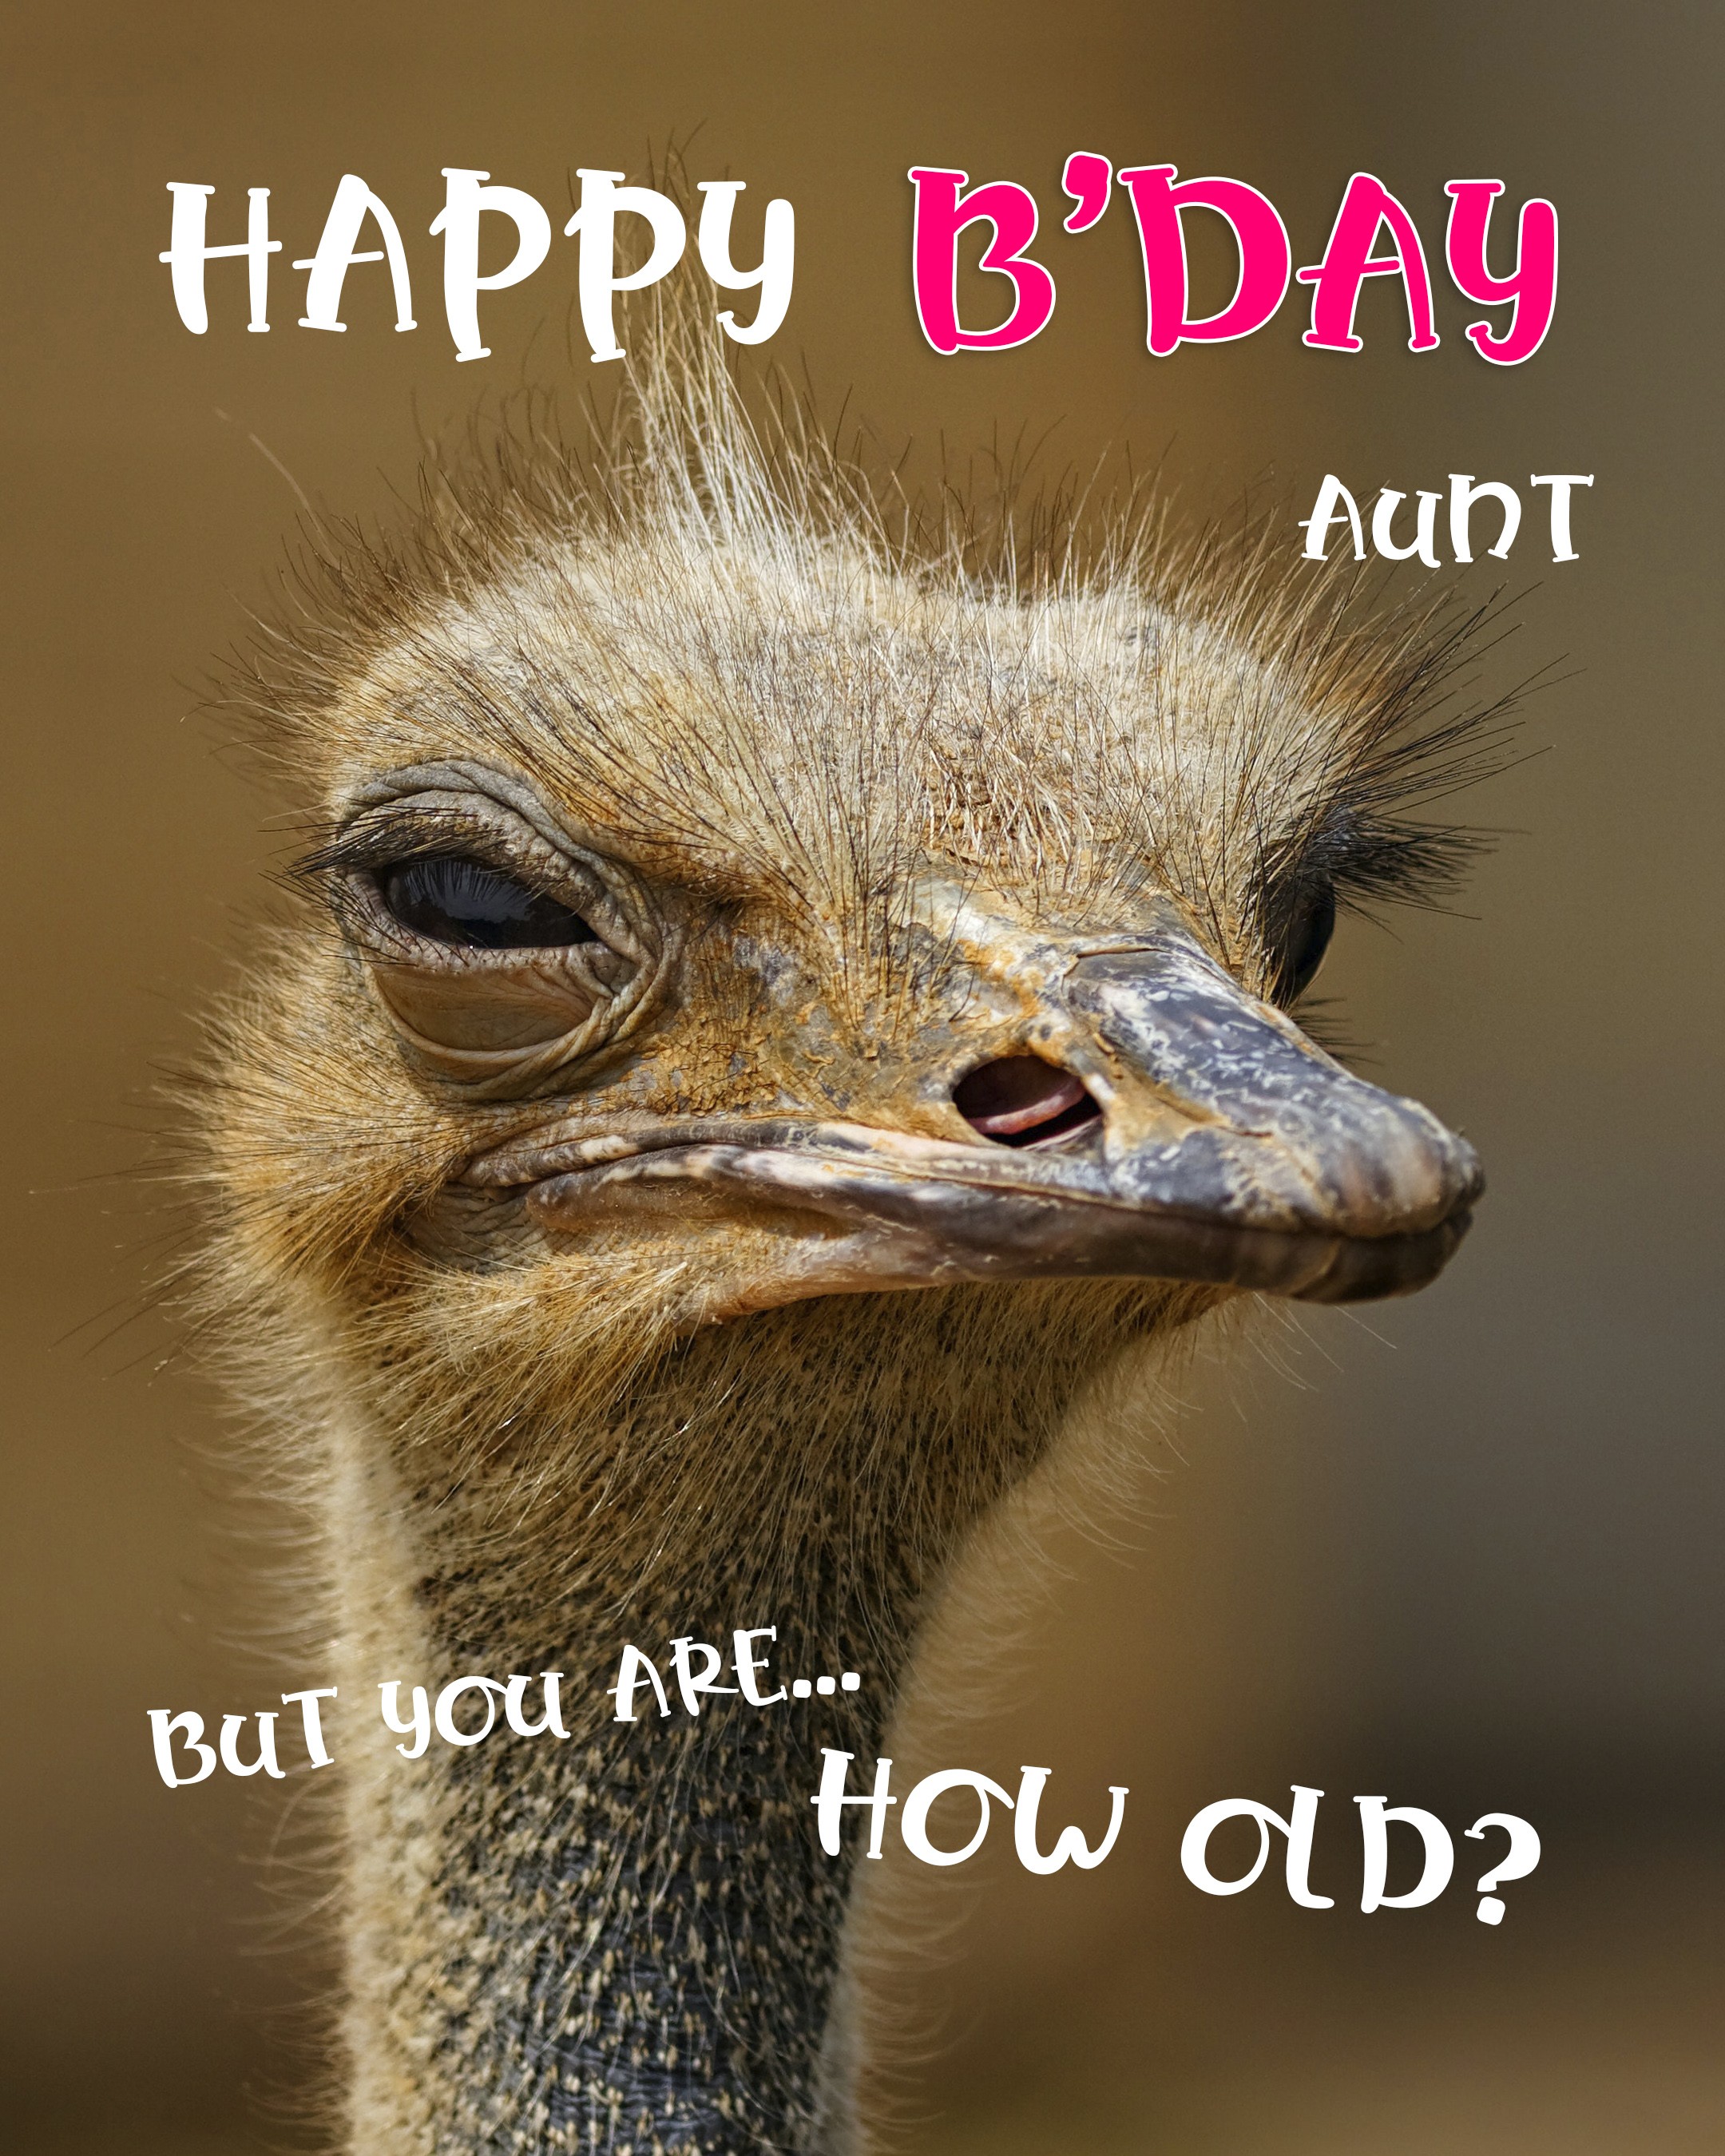 Free Funny Happy Birthday Image For Aunt With Ostrich 